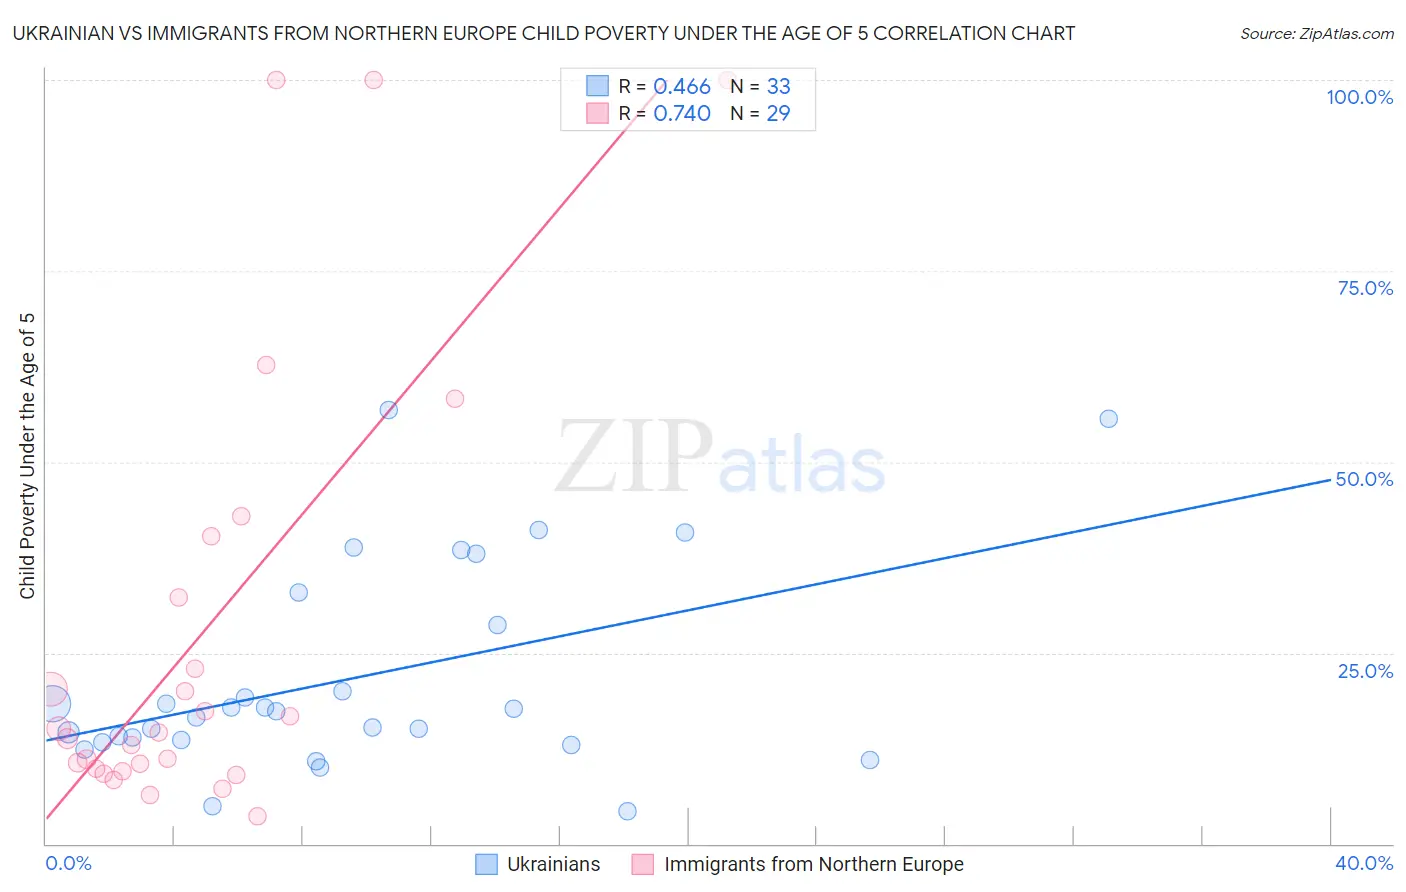 Ukrainian vs Immigrants from Northern Europe Child Poverty Under the Age of 5